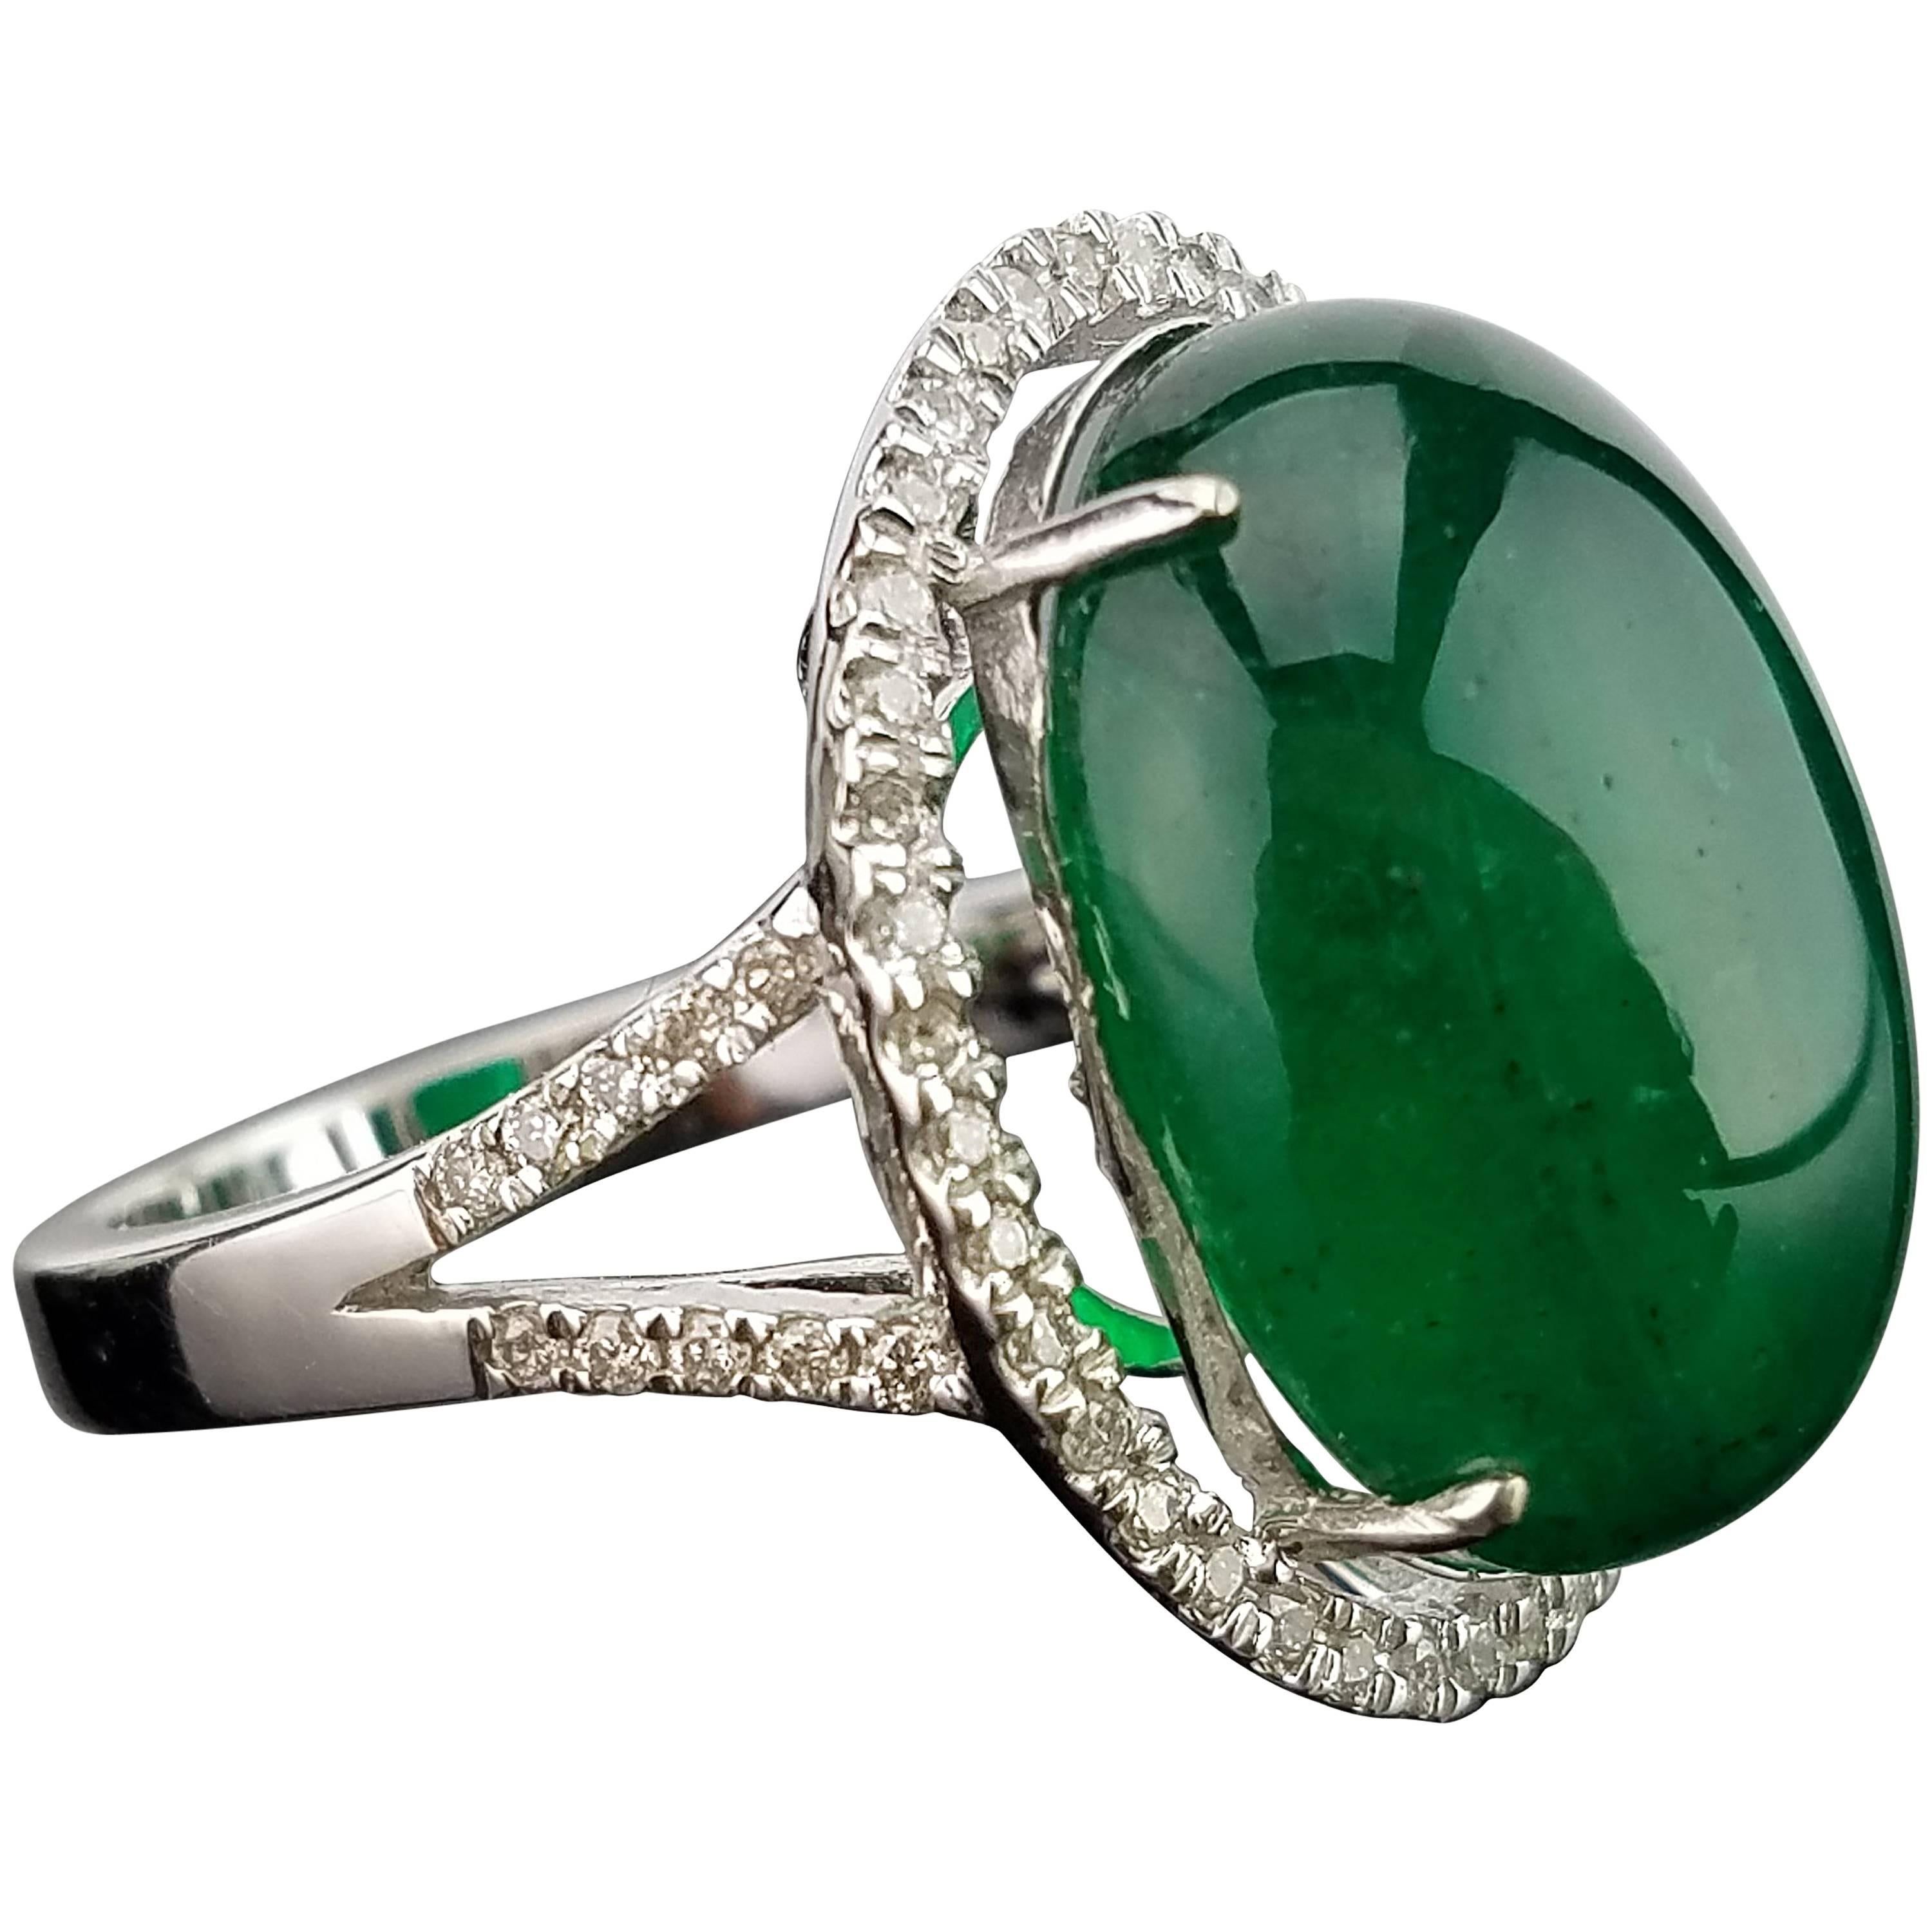 17.35 Carat Emerald Cabochon and Diamond Cocktail Ring